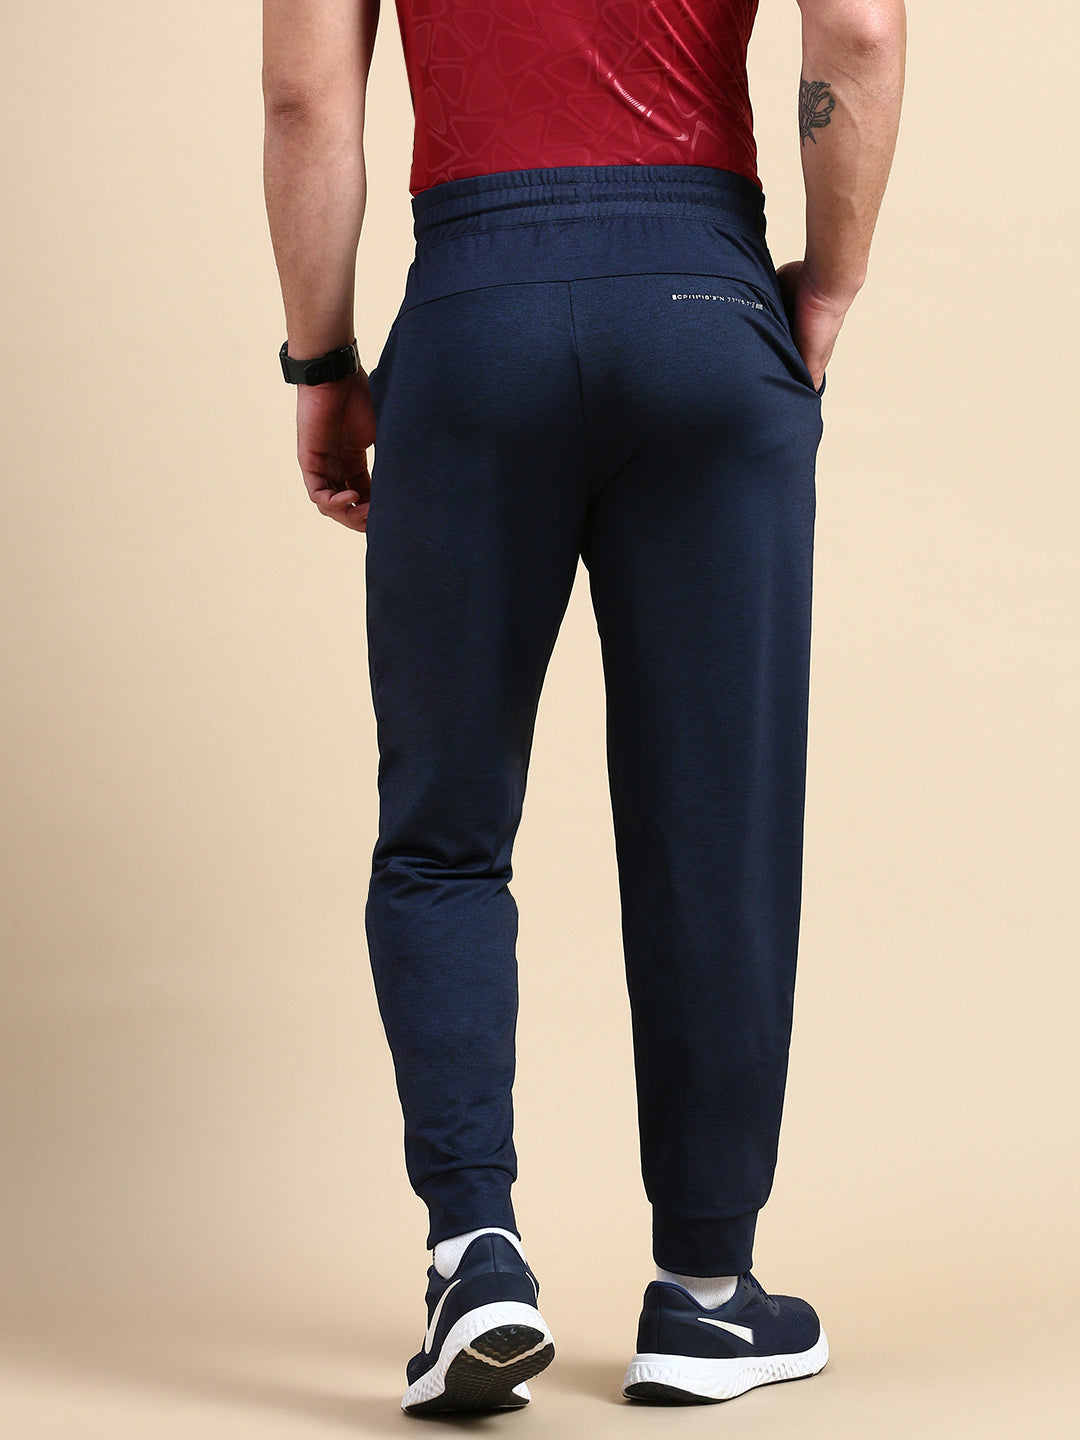 Classic Polo Men's Bottom Polyester Navy Blue Slim Fit Active Wear Tra